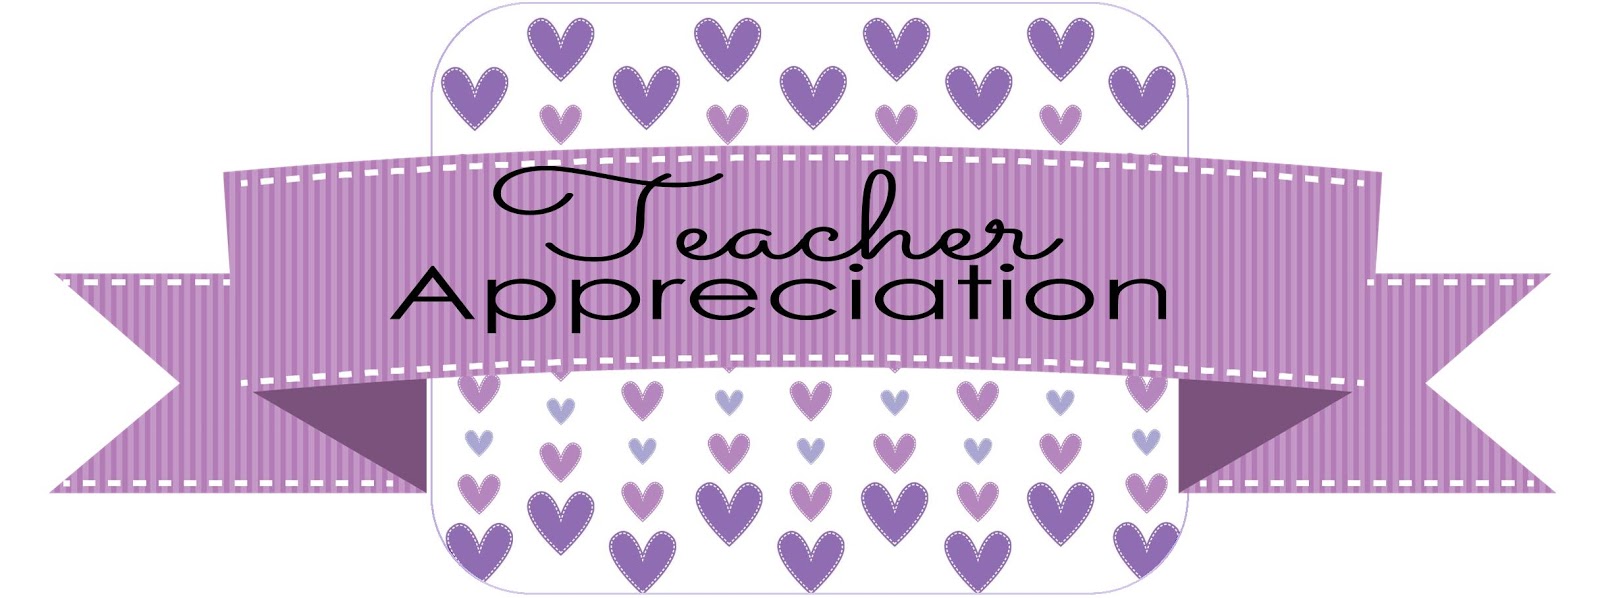 It's Written on the Wall: Teacher Appreciation Printables and FUN